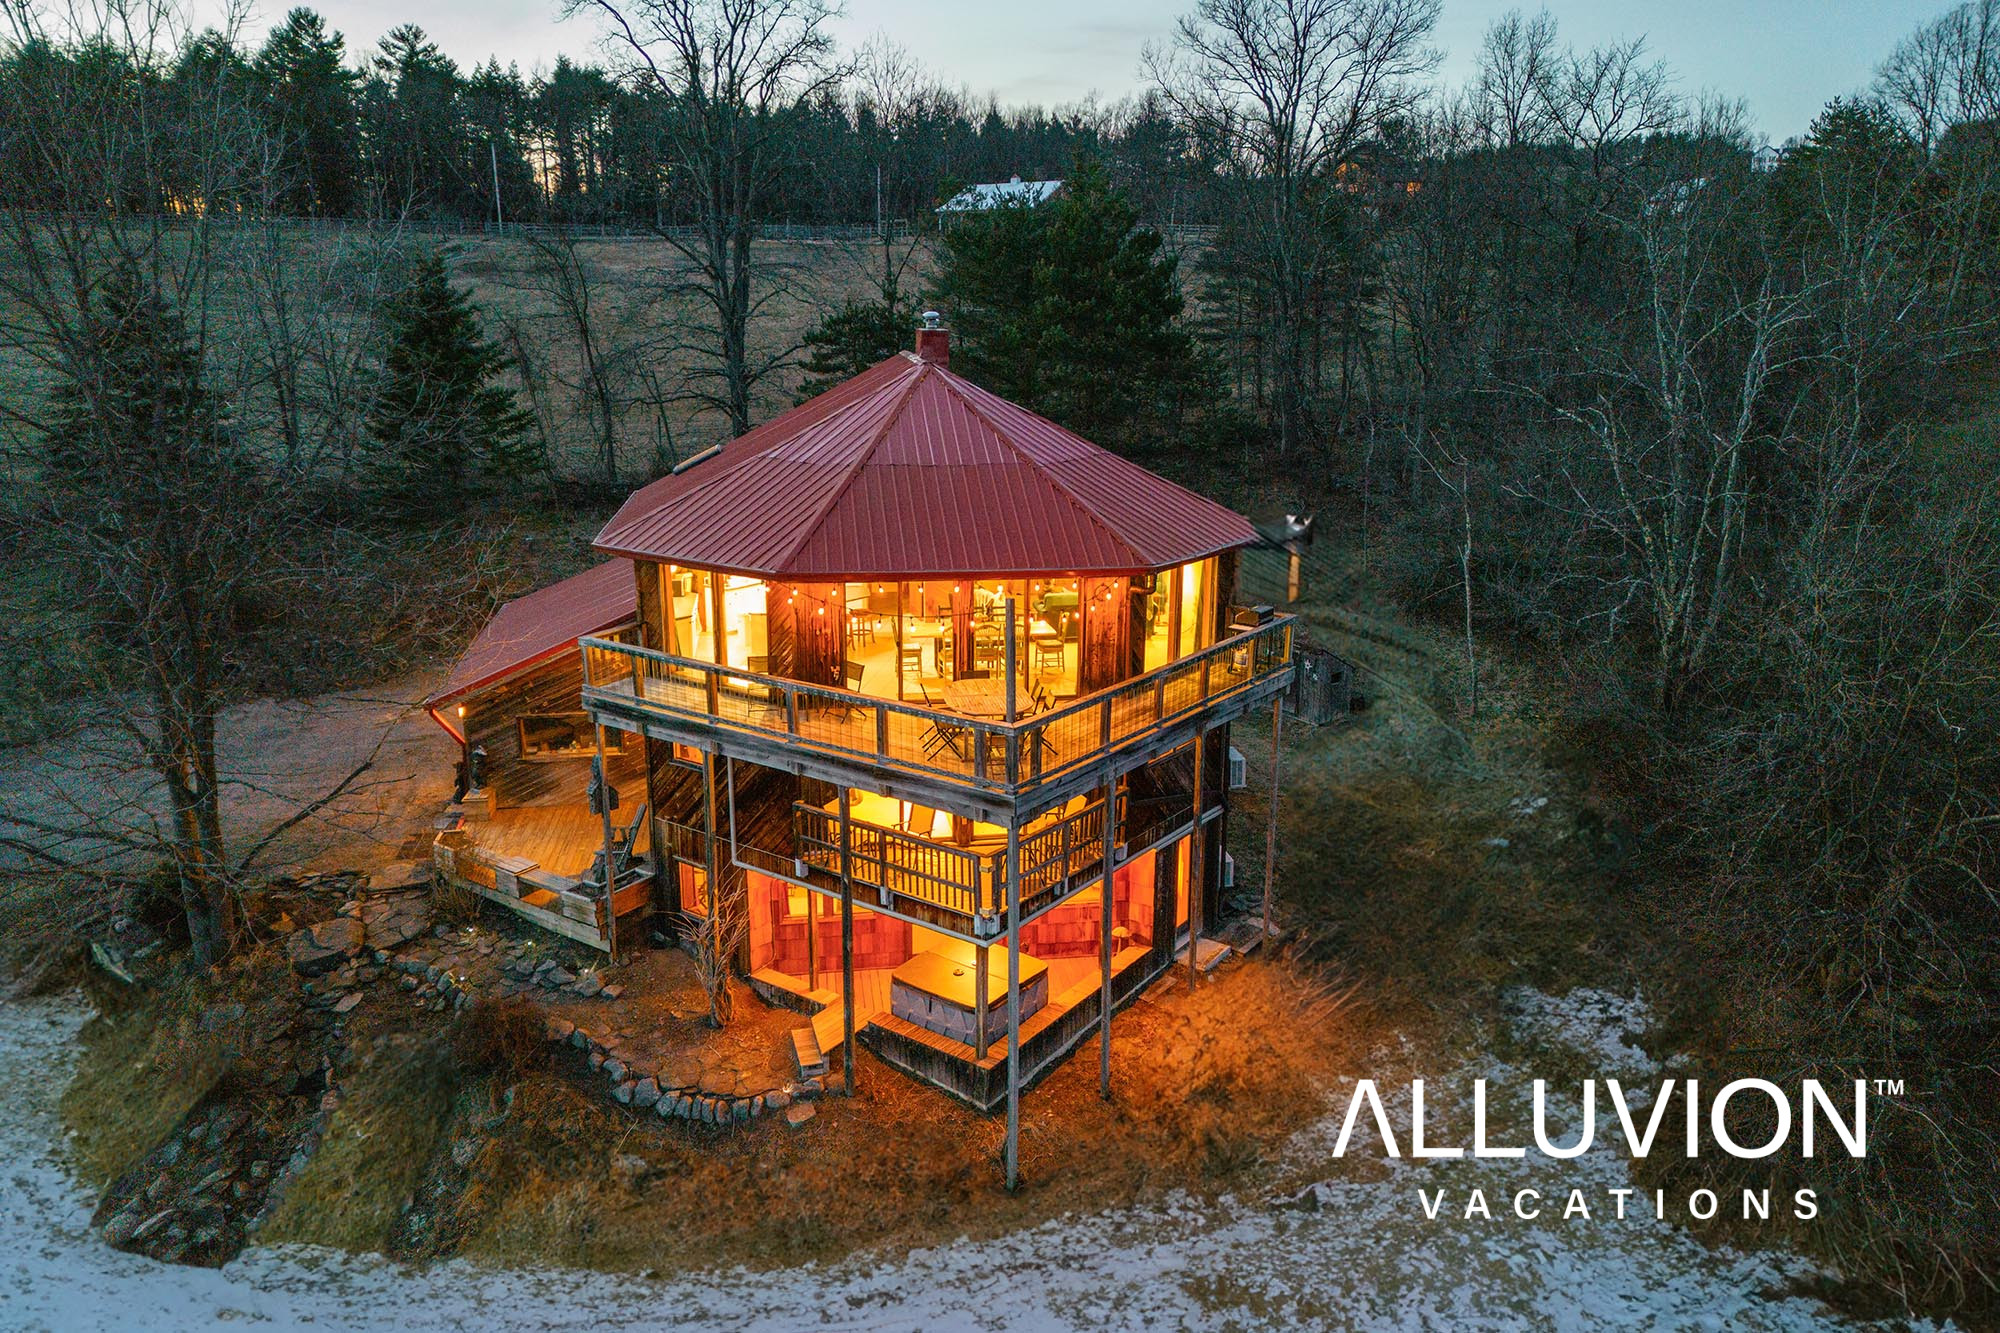 Catskills Cabin Living: A Fusion of Rustic Charm, Modern Amenities, and Sustainable Travel - Embracing Experiential Hospitality